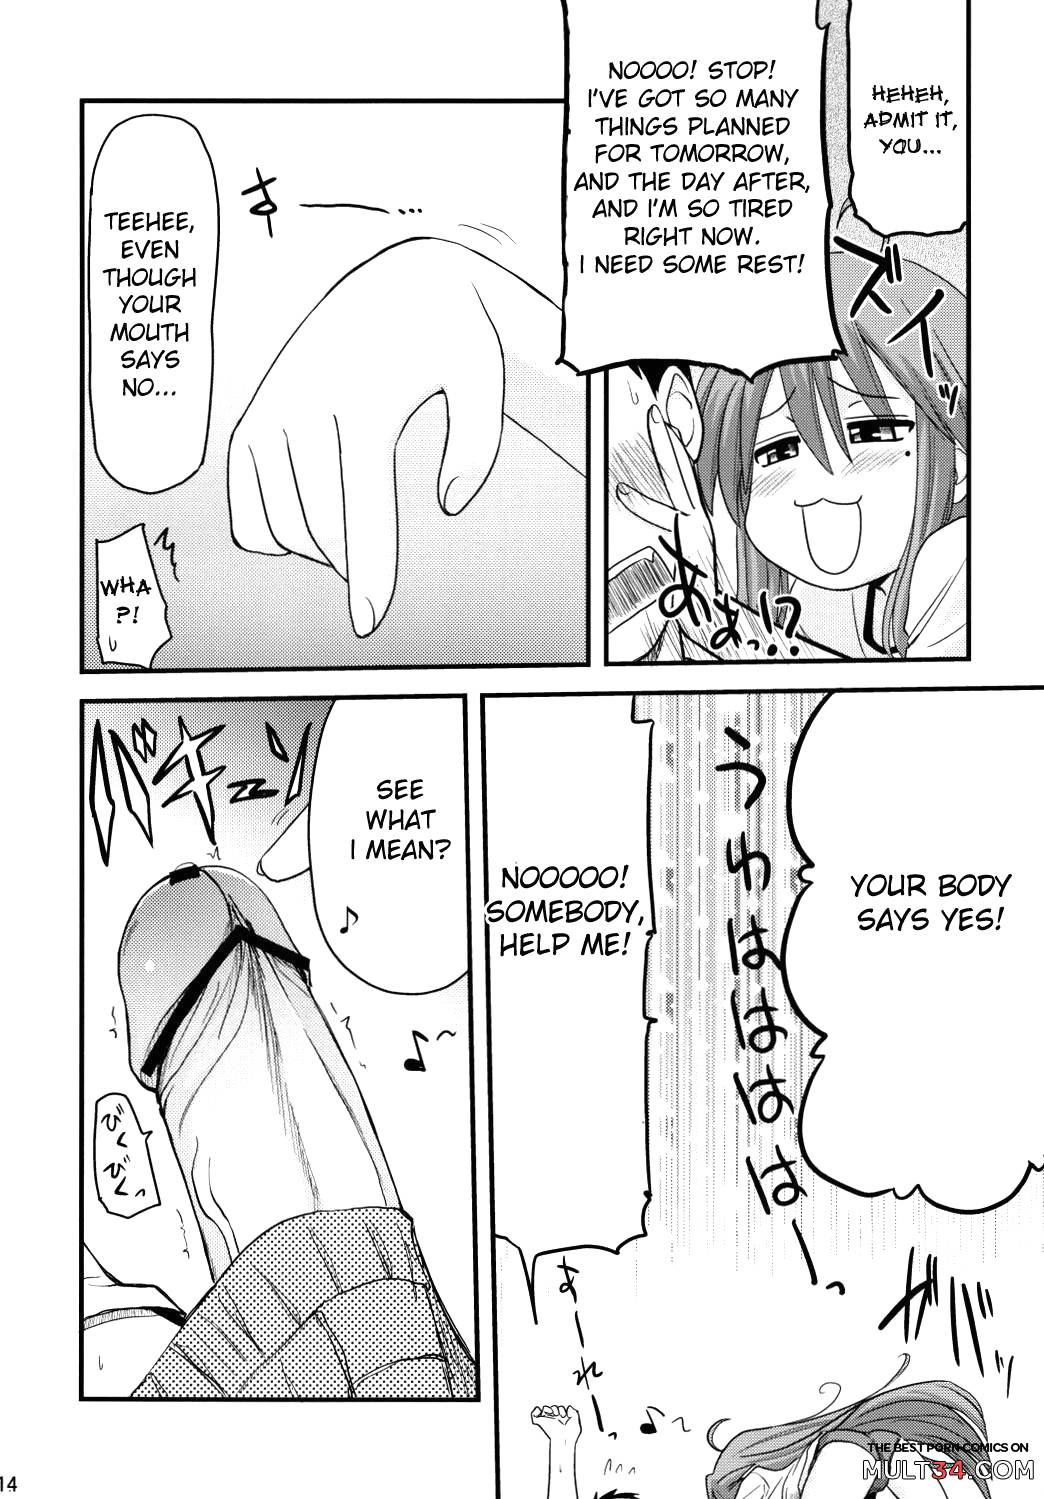 Konata and Oh-zu 4 people each and every one + 1 page 10